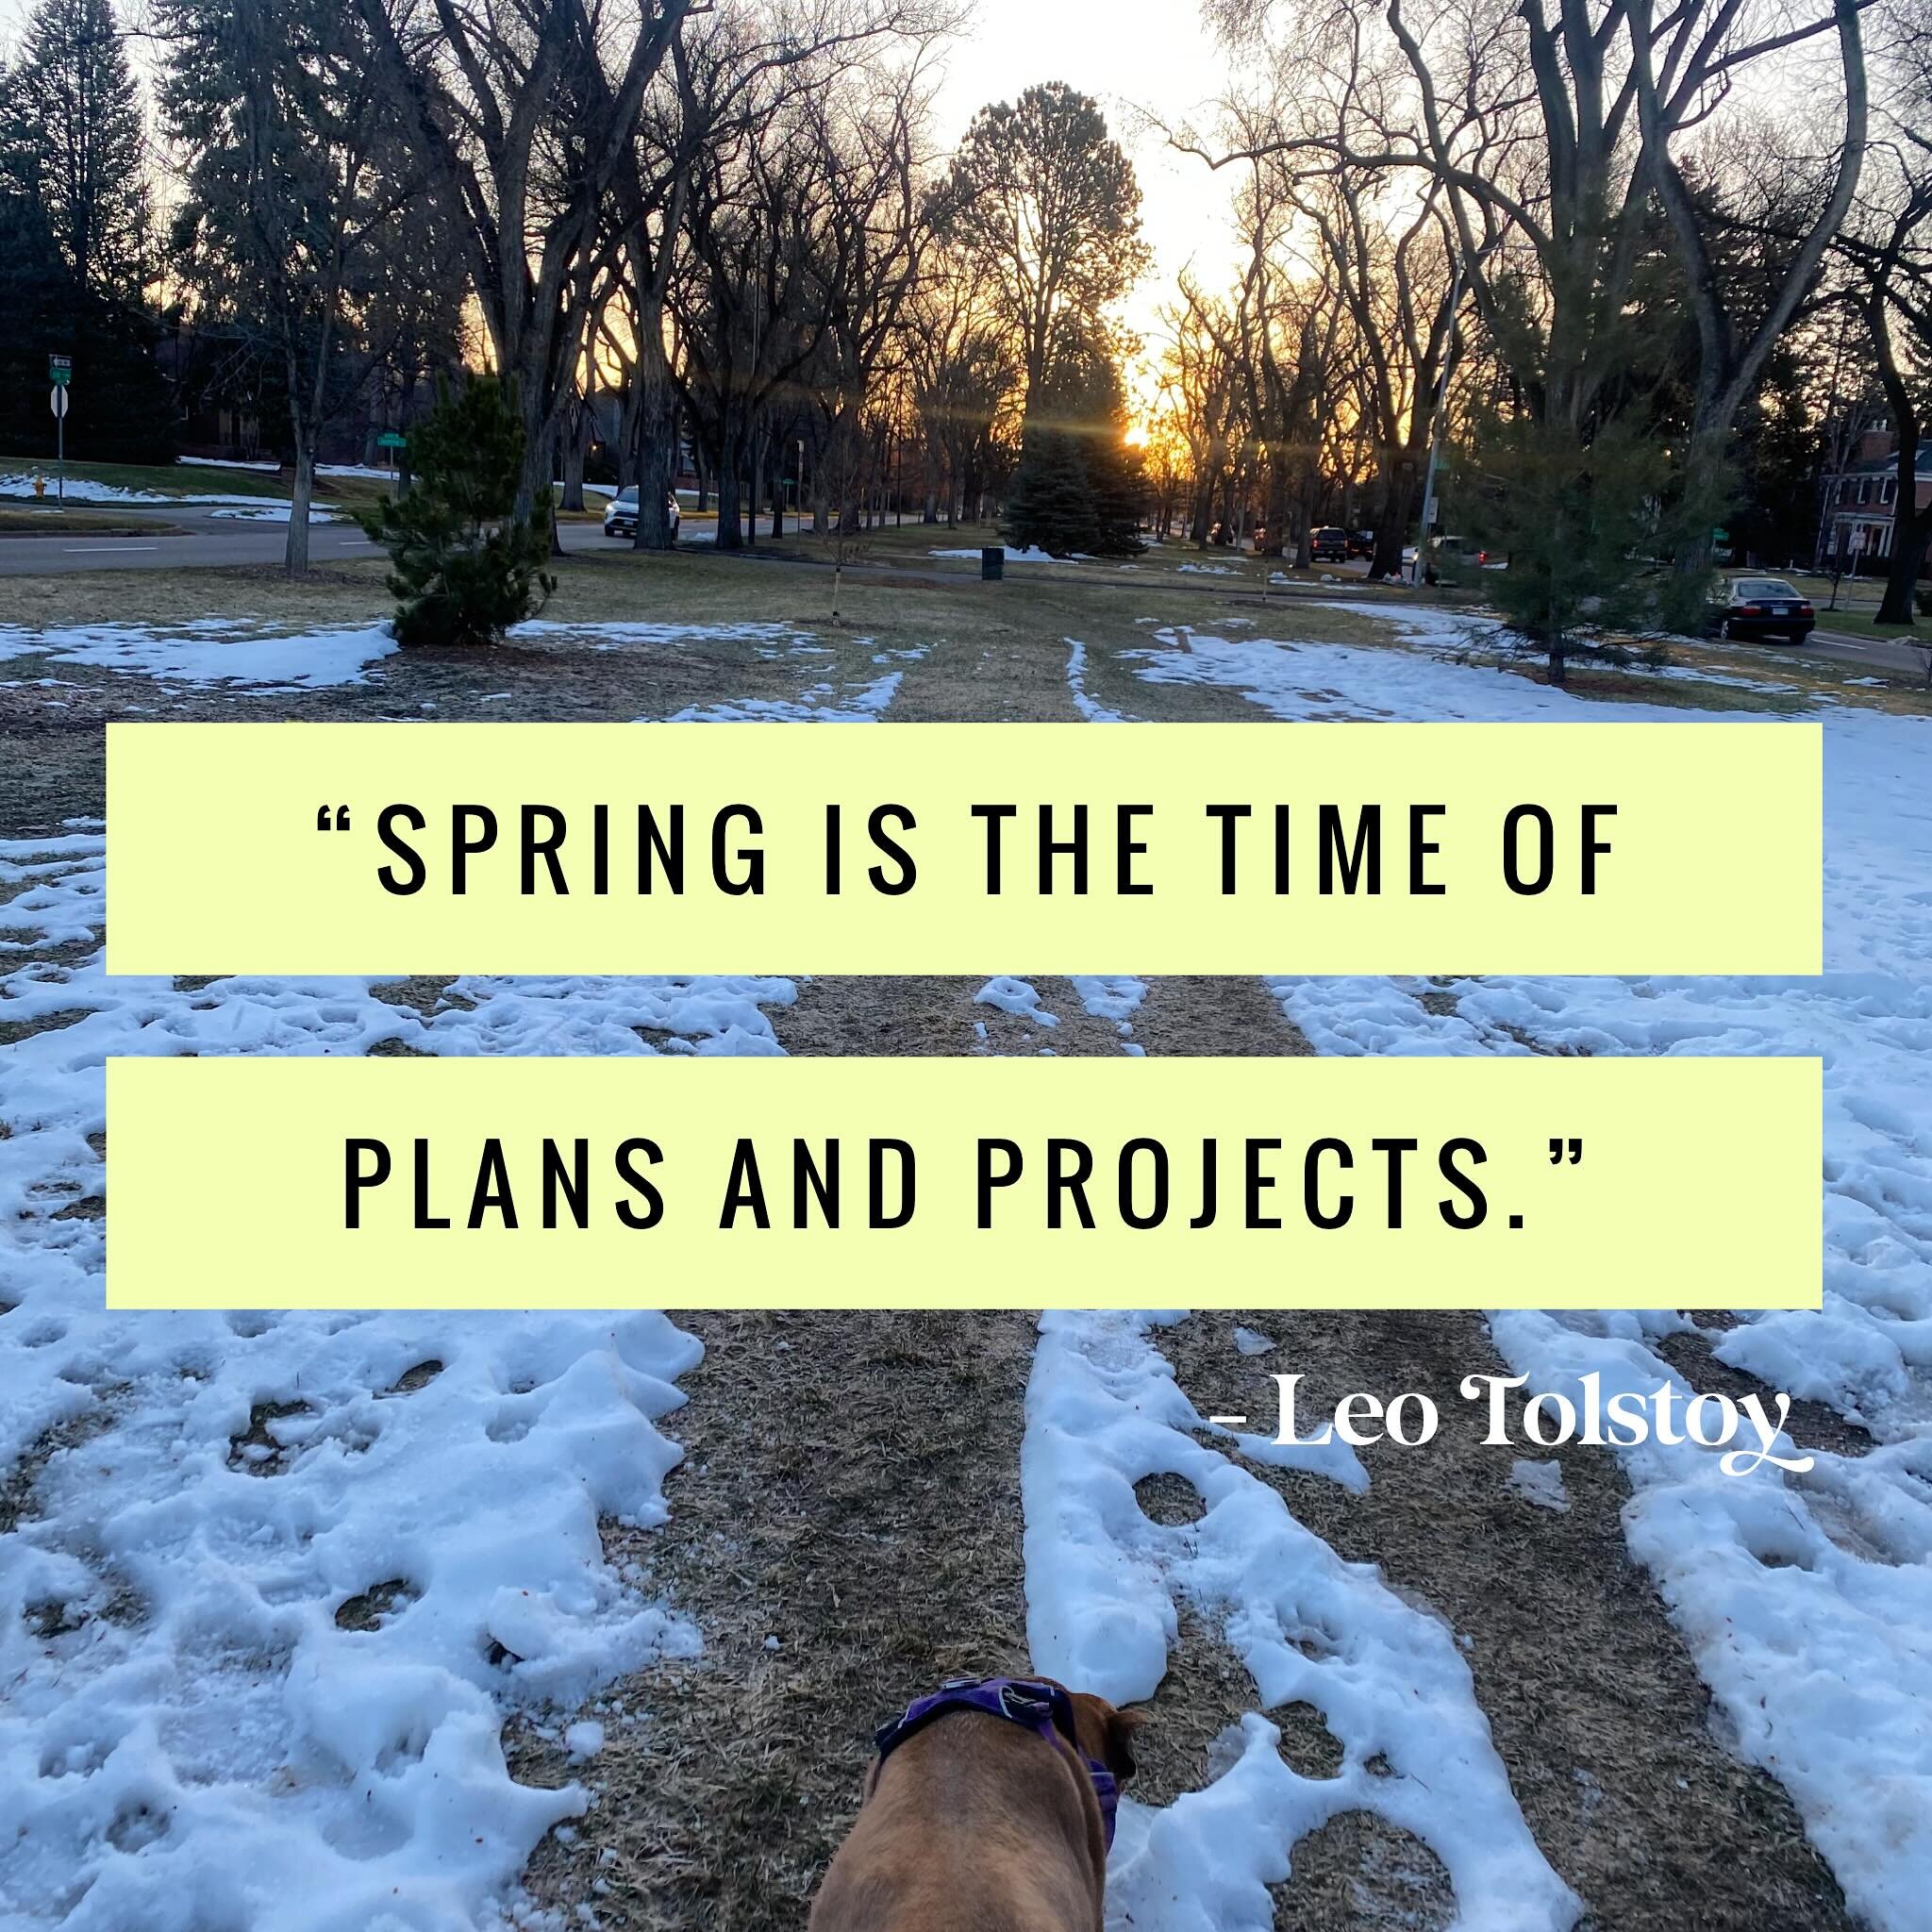 This is one of my most favorite nutrition topics and ways to practice change and getting in touch with what I need&hellip; Seasonal nutrition!

Spring is such a beautiful season. And nature is the ultimate guide on how to live.

Like Tolstoy said, it